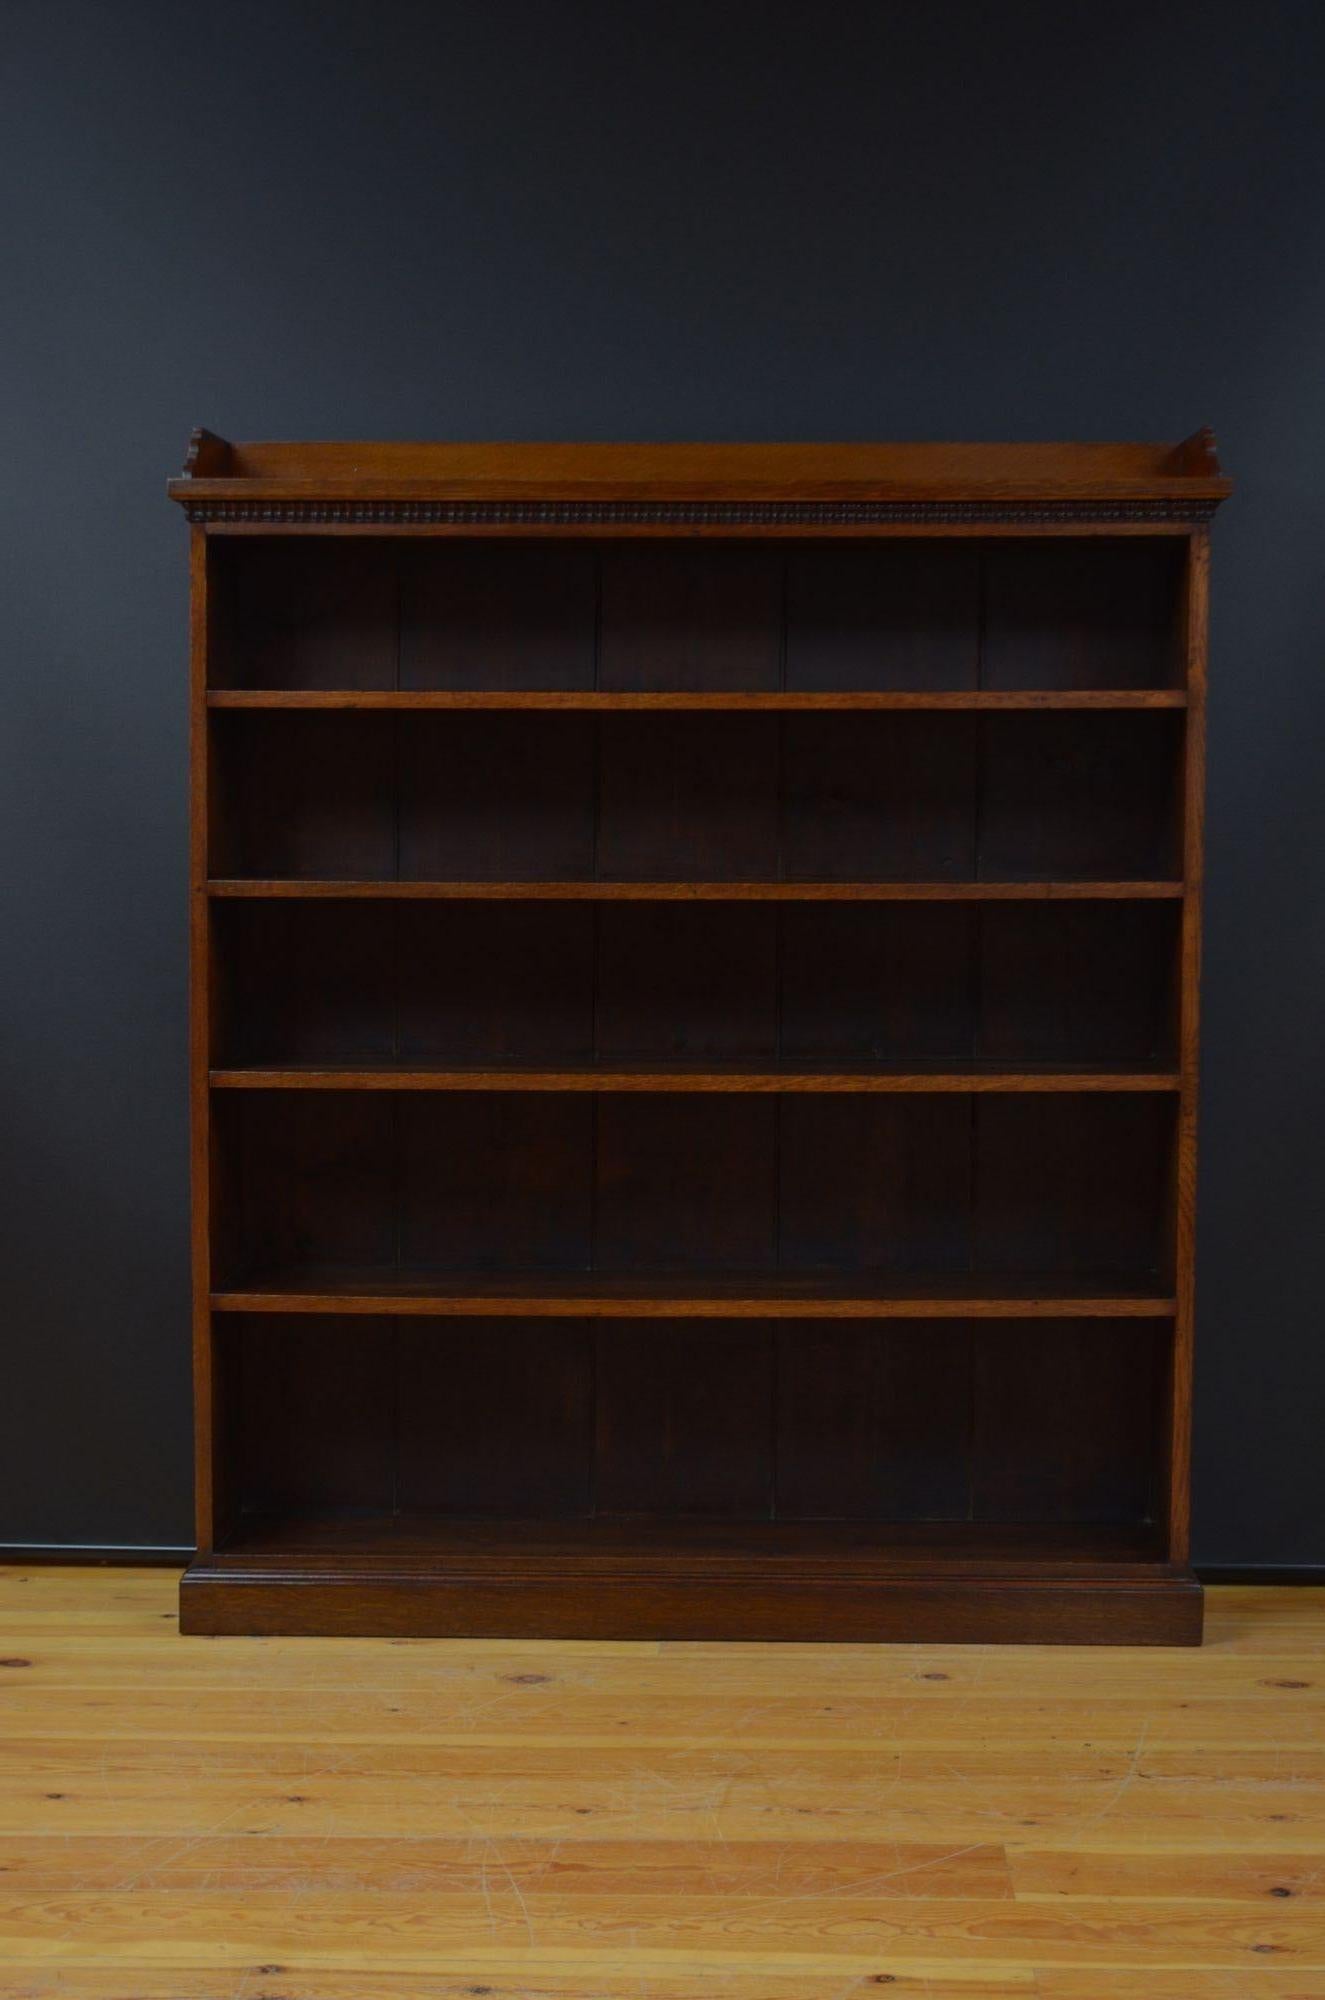 ST052 Victorian large solid oak country open bookcase having oversailing top fitted with upstand and moulded edge decoration to the under side of the top, with four shelves that are in a fixed position graduating in size. All standing on a plinth